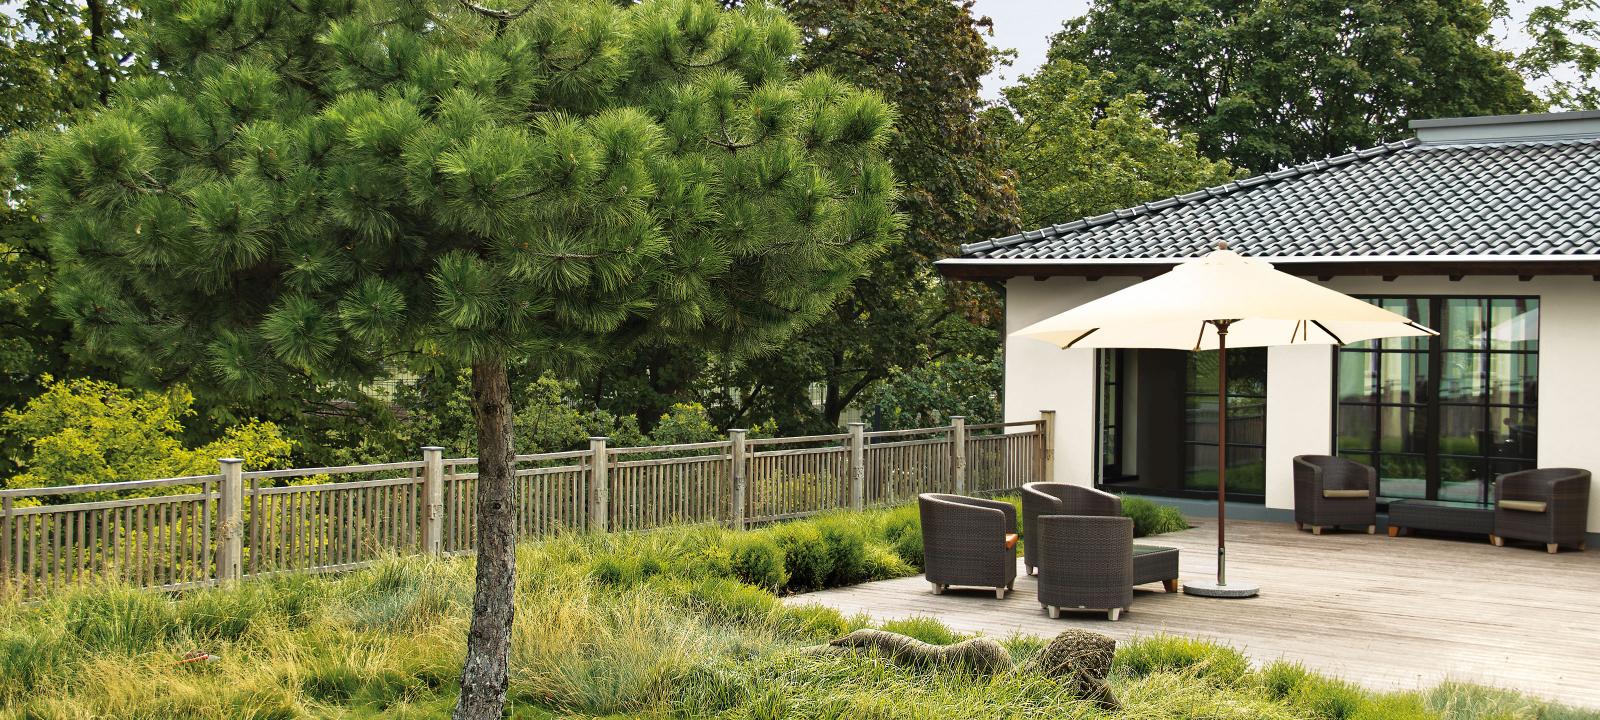 Roof garden with pine tree, ornamental grasses and seating area with paving